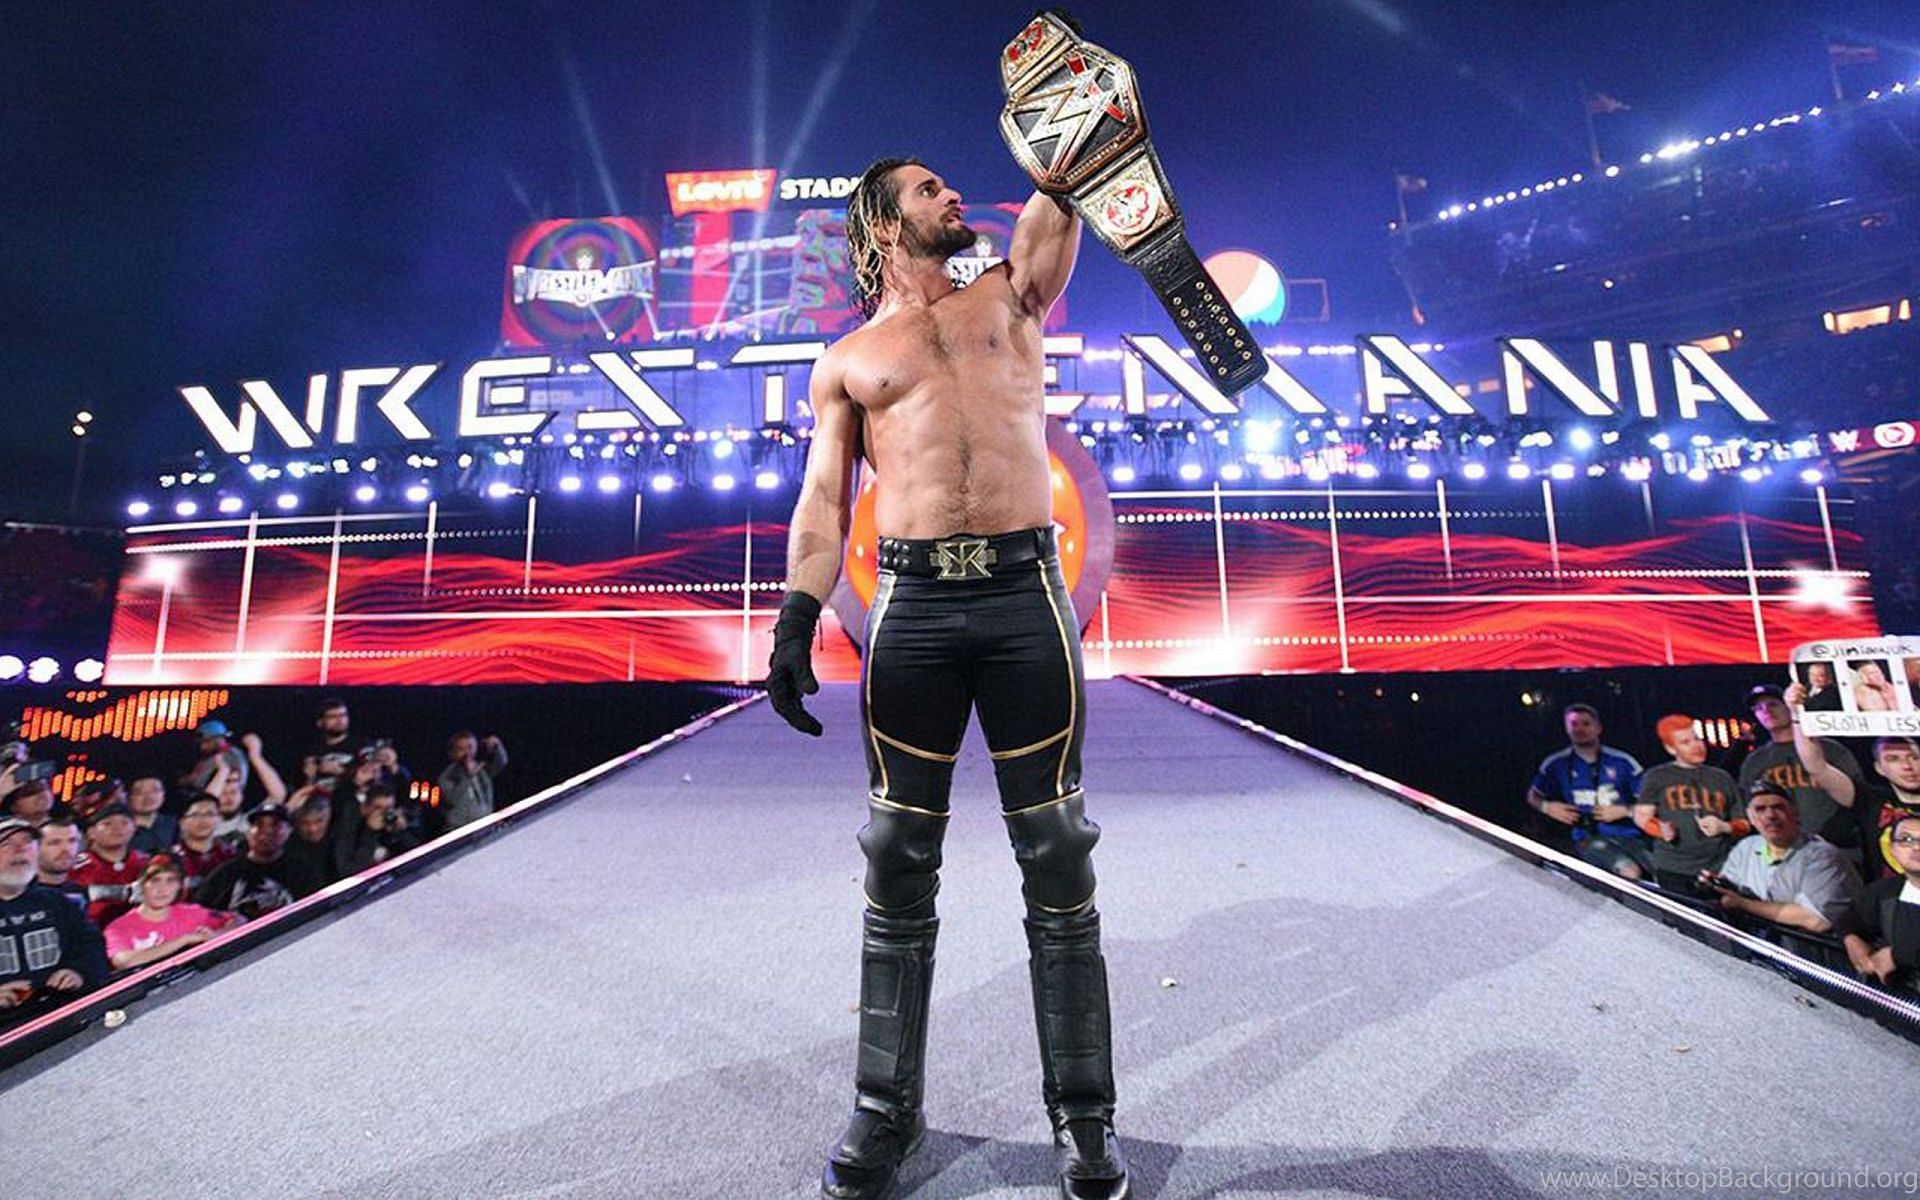 Seth Rollins captures his first world title at WrestleMania 31